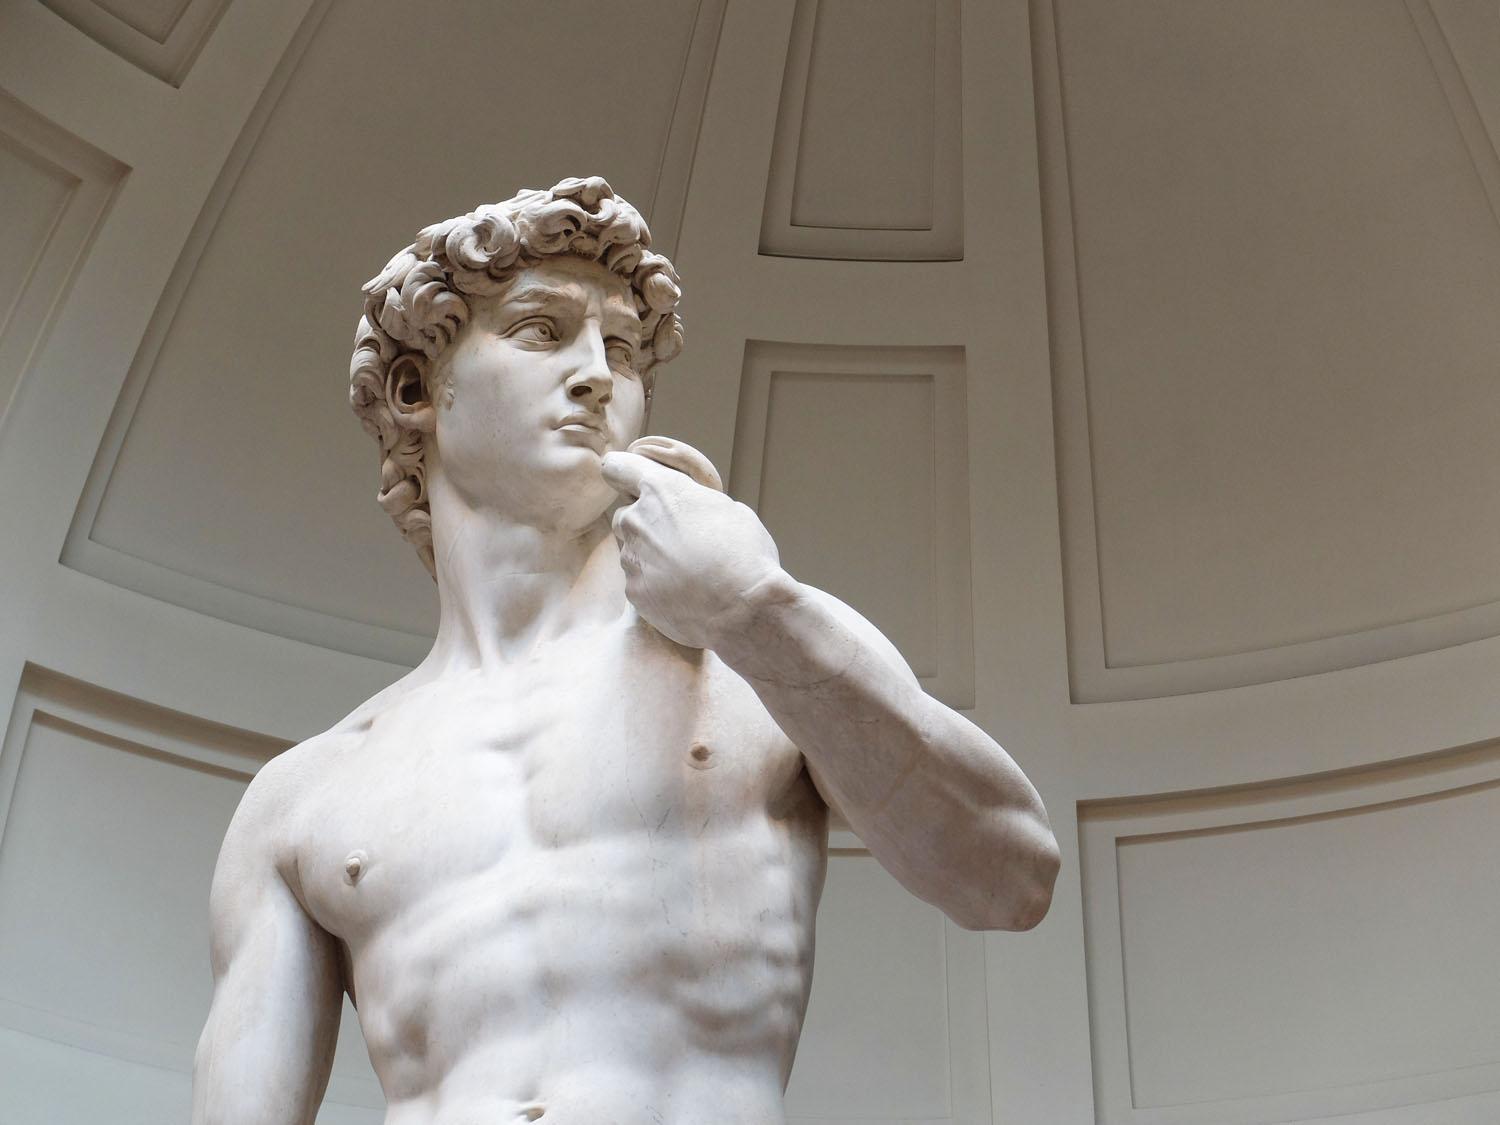 🗽 Can You Match These Famous Statues to Their Locations? David of Michelangelo statue